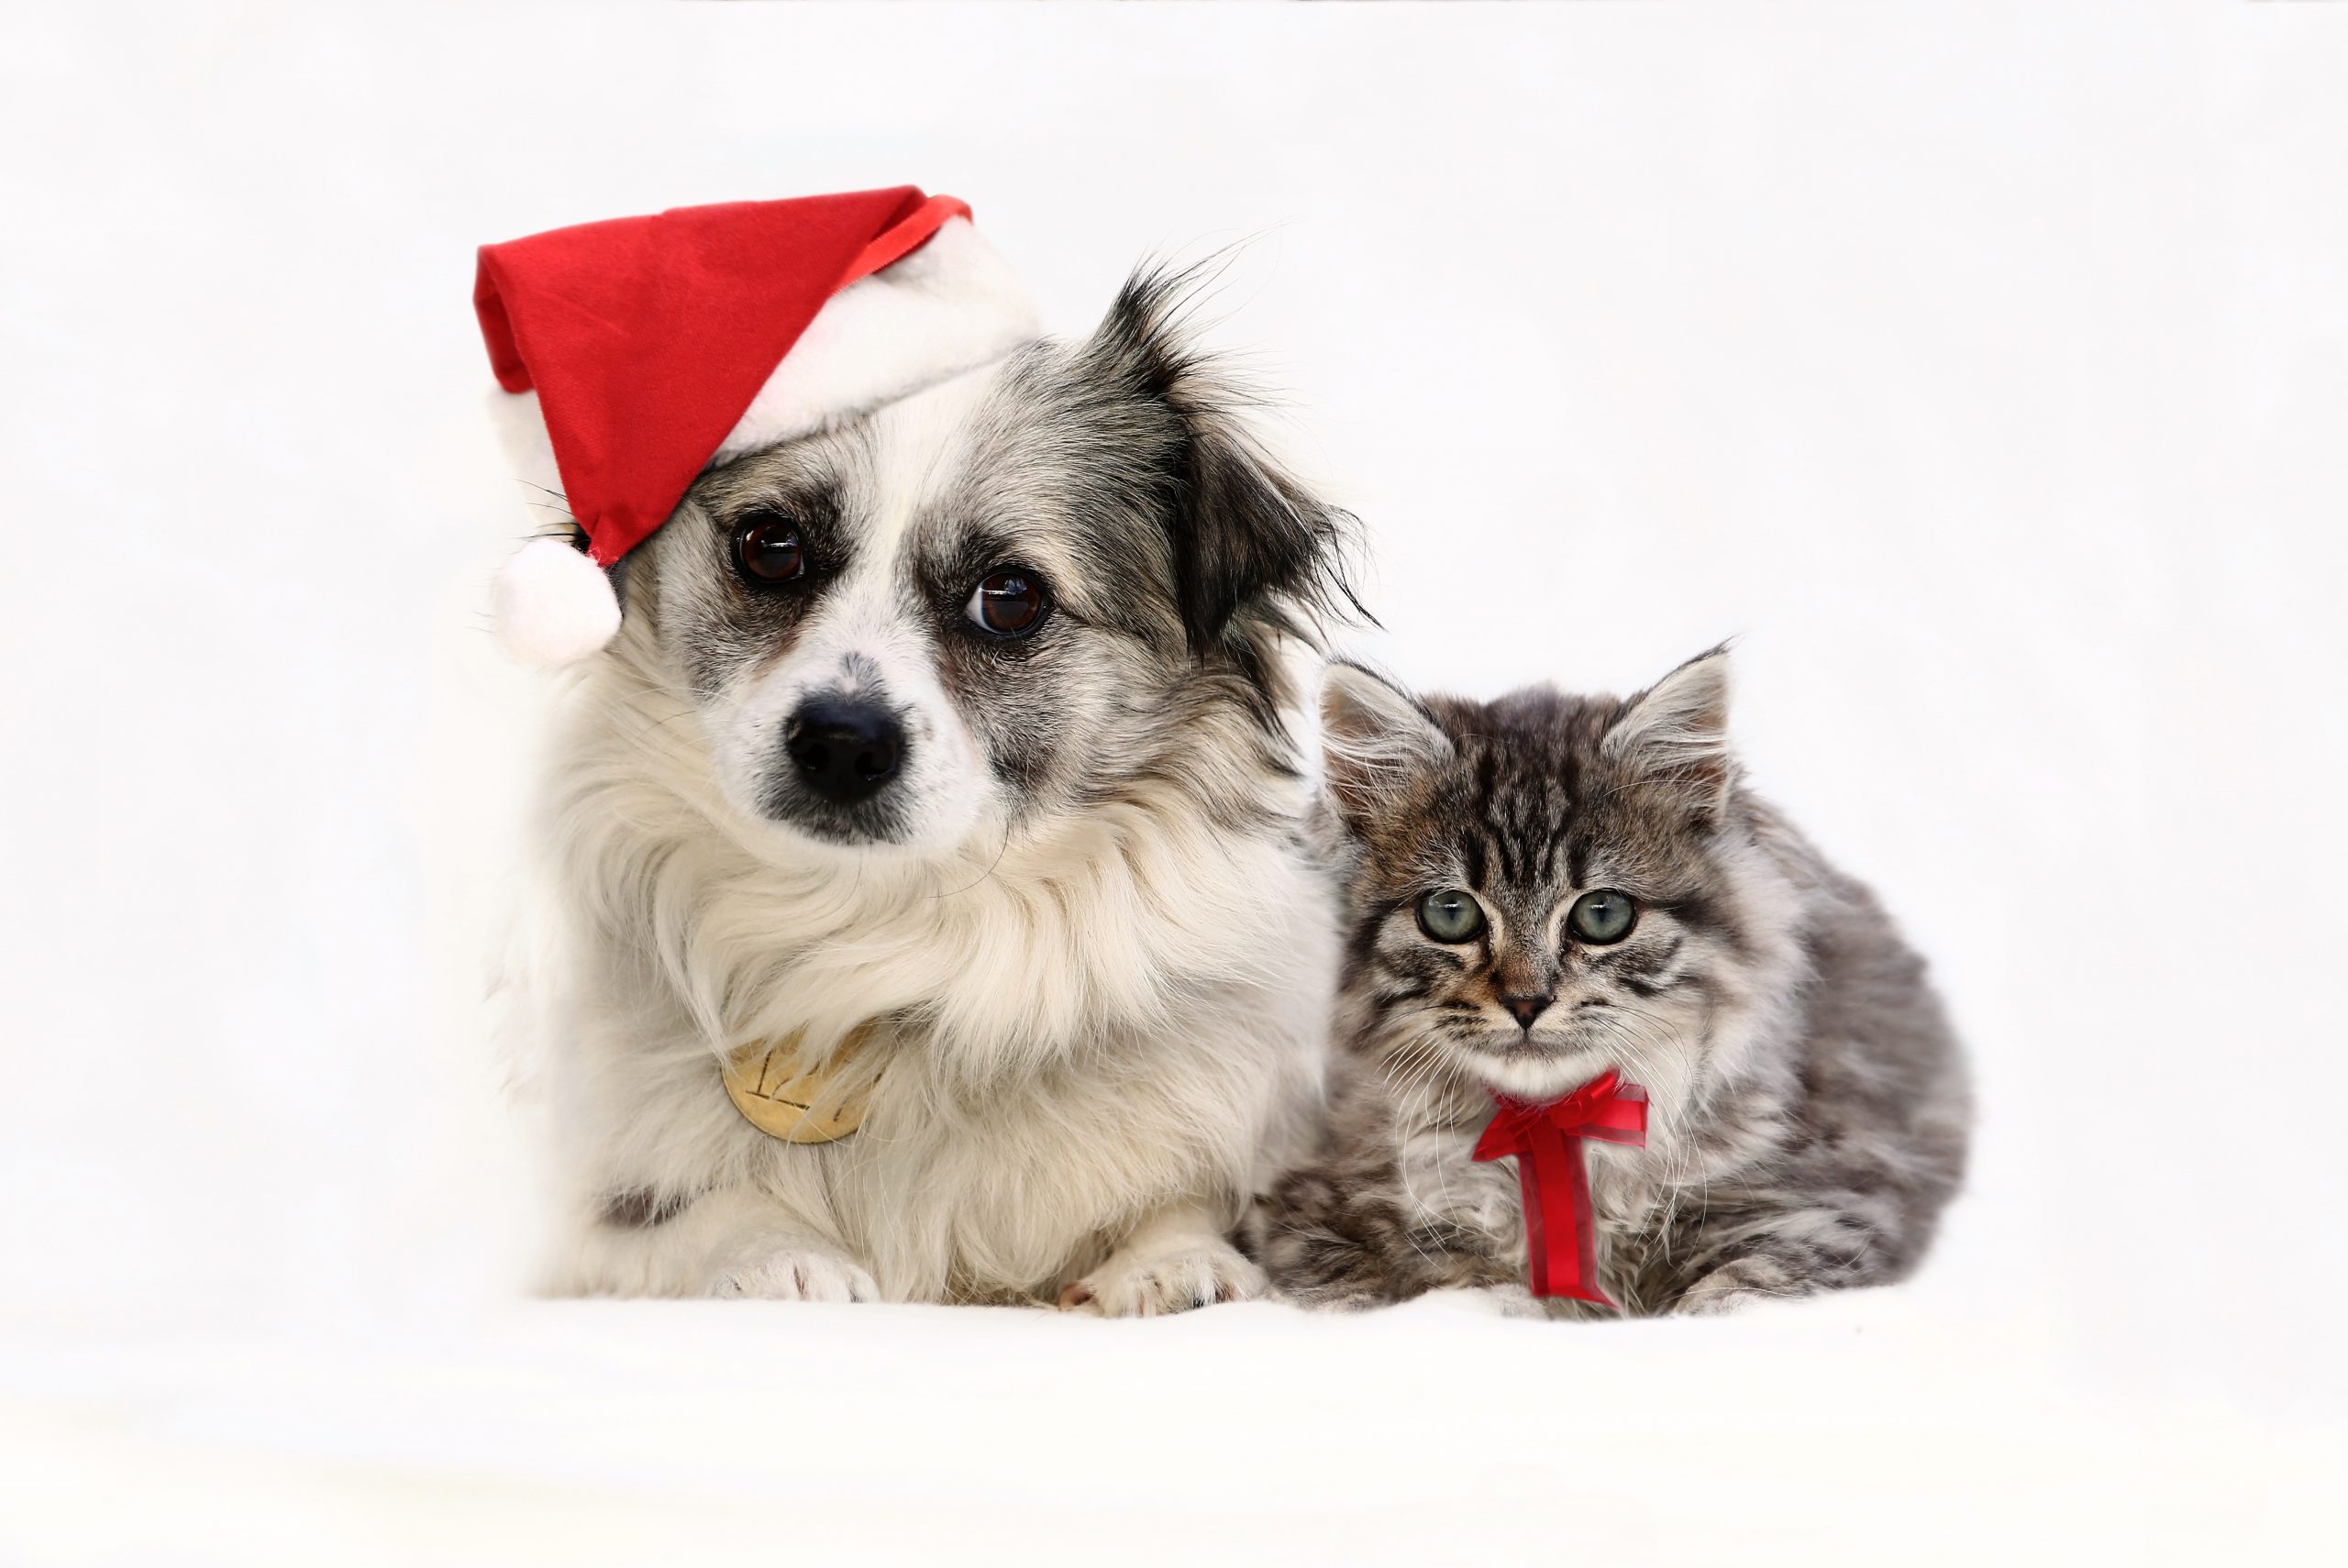 https://dogshome.com/wp-content/uploads/2021/12/D74W9735_donor-xmas-photo_1-scaled.jpg